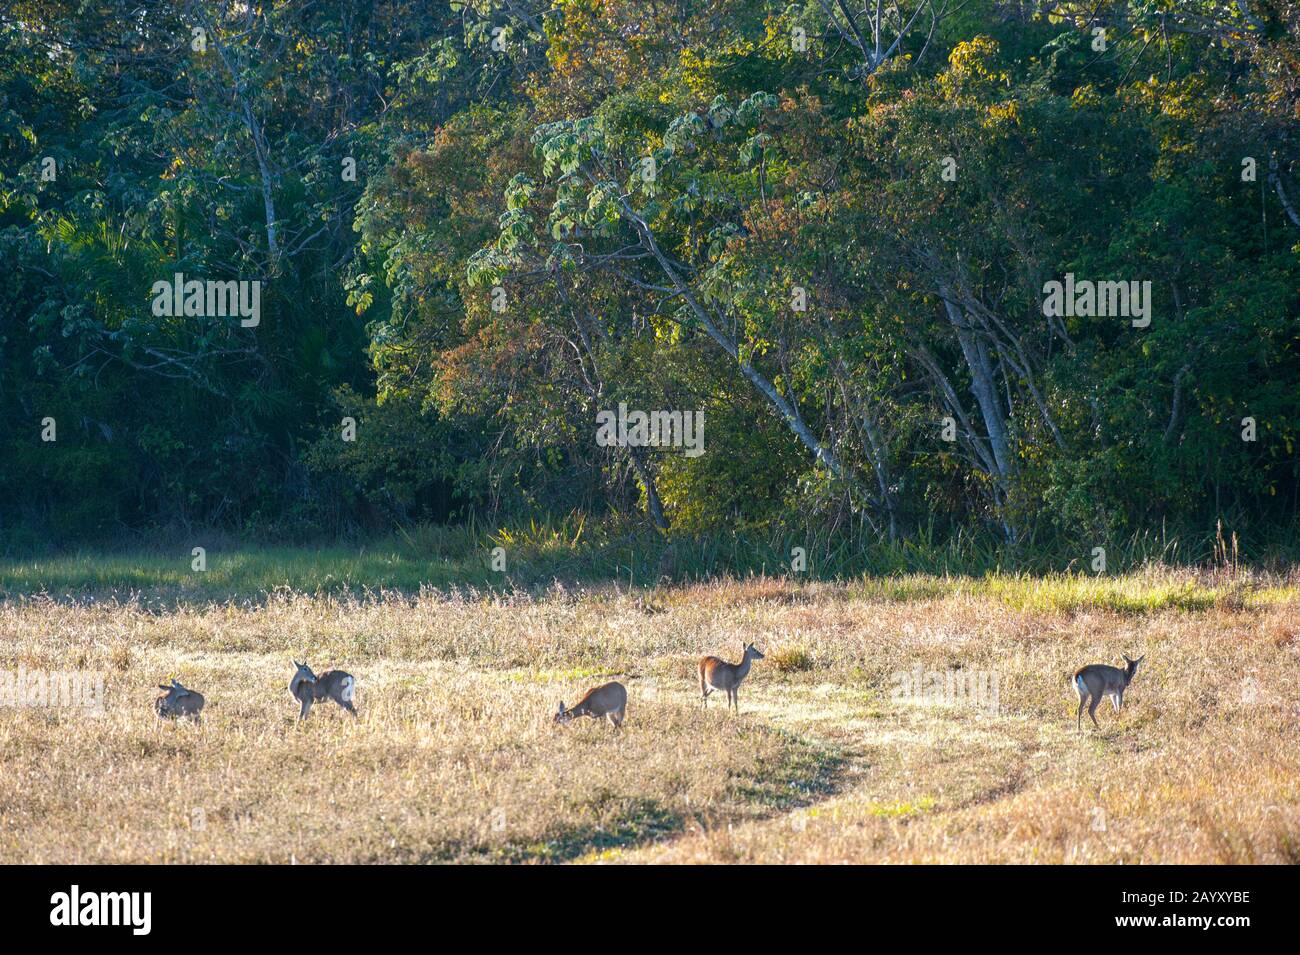 Pampas deer (Ozotoceros bezoarticus) at Caiman Ranch in the Southern Pantanal in Brazil. Stock Photo